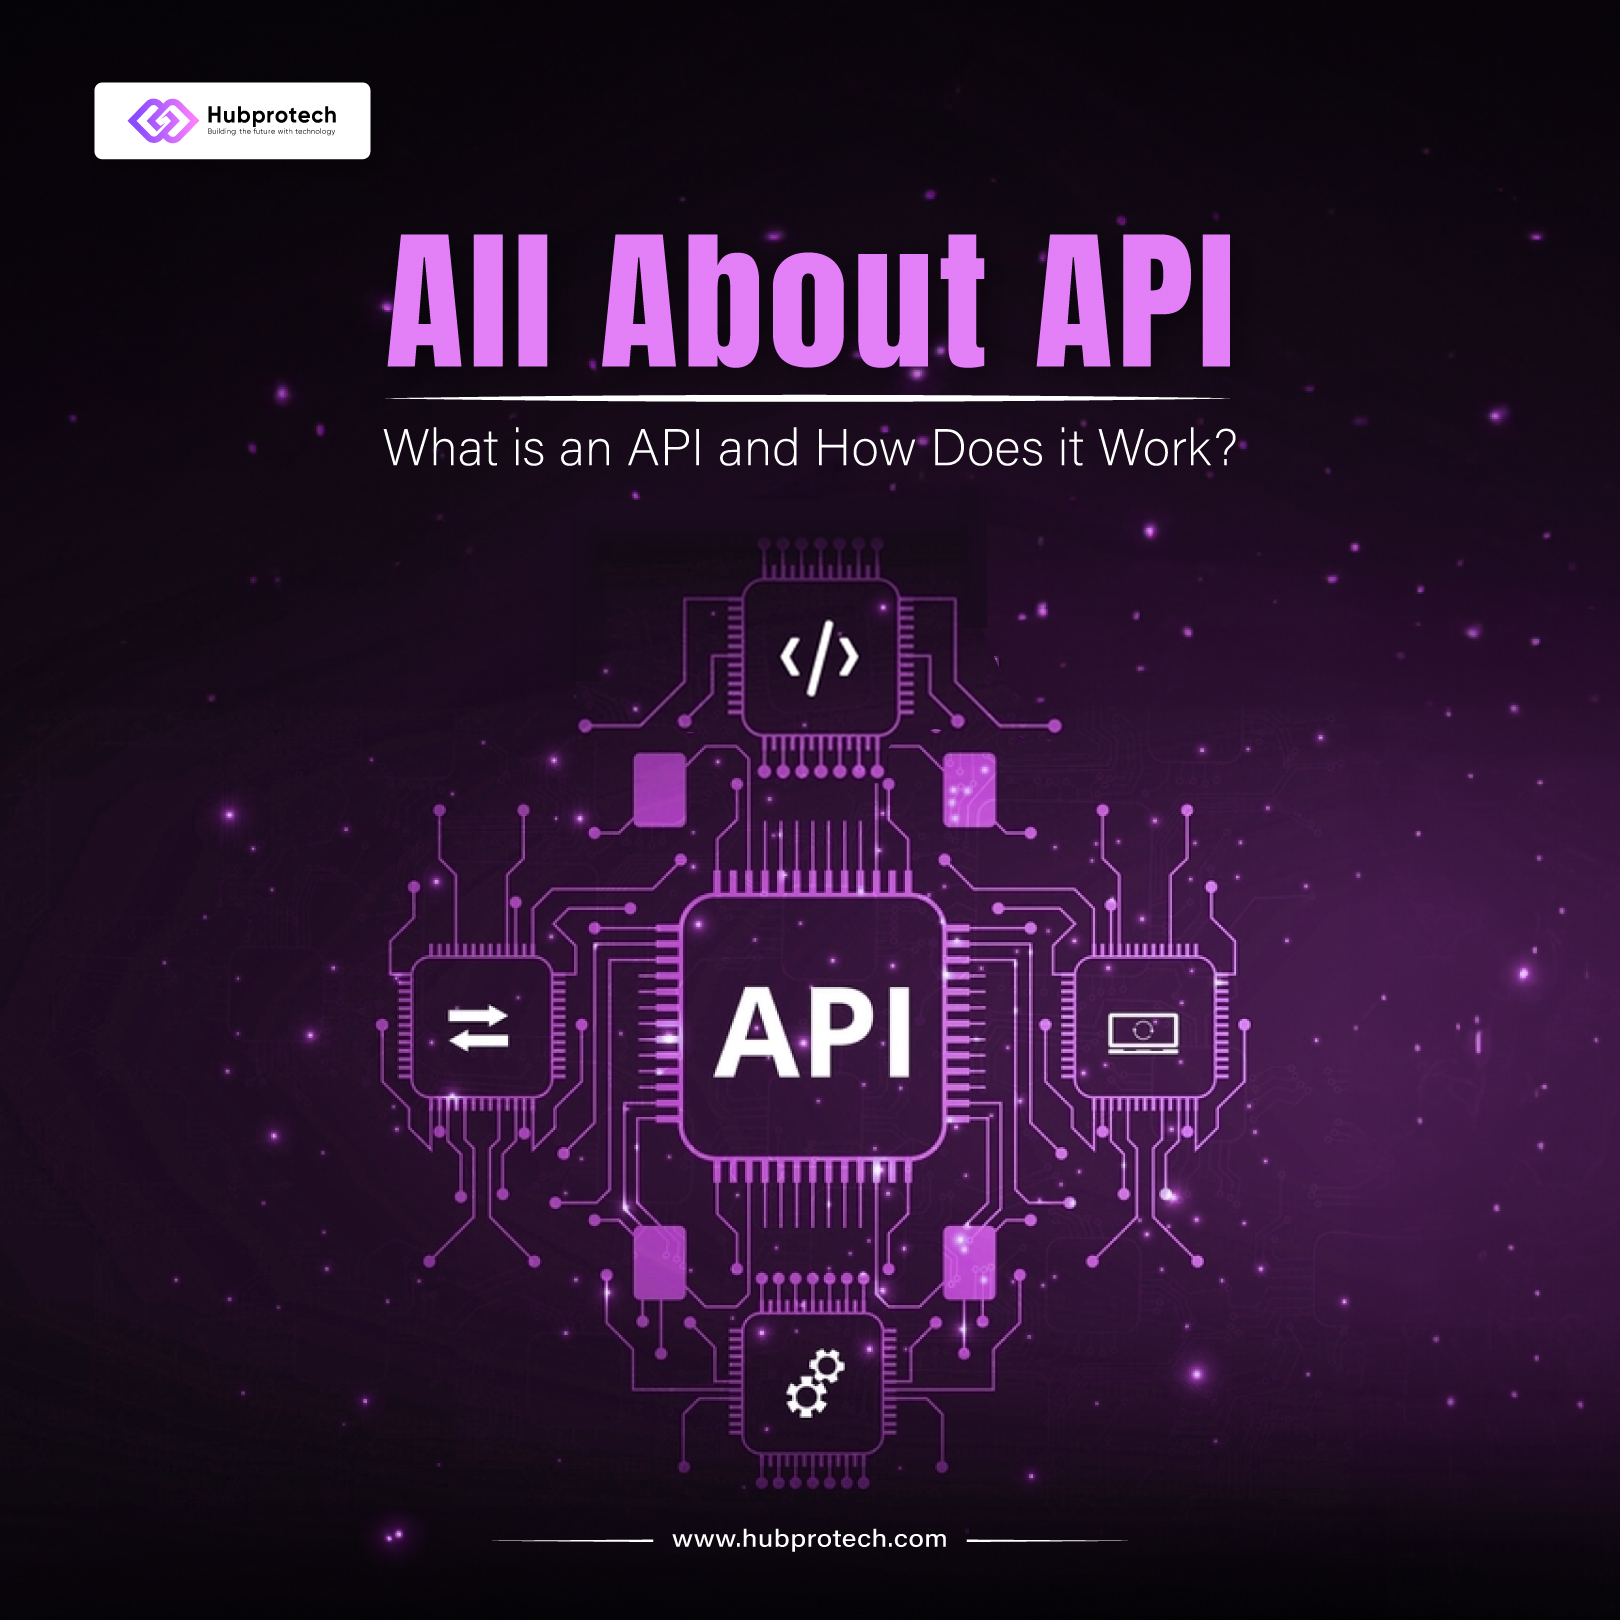 All About API! What is an API and How does it work?